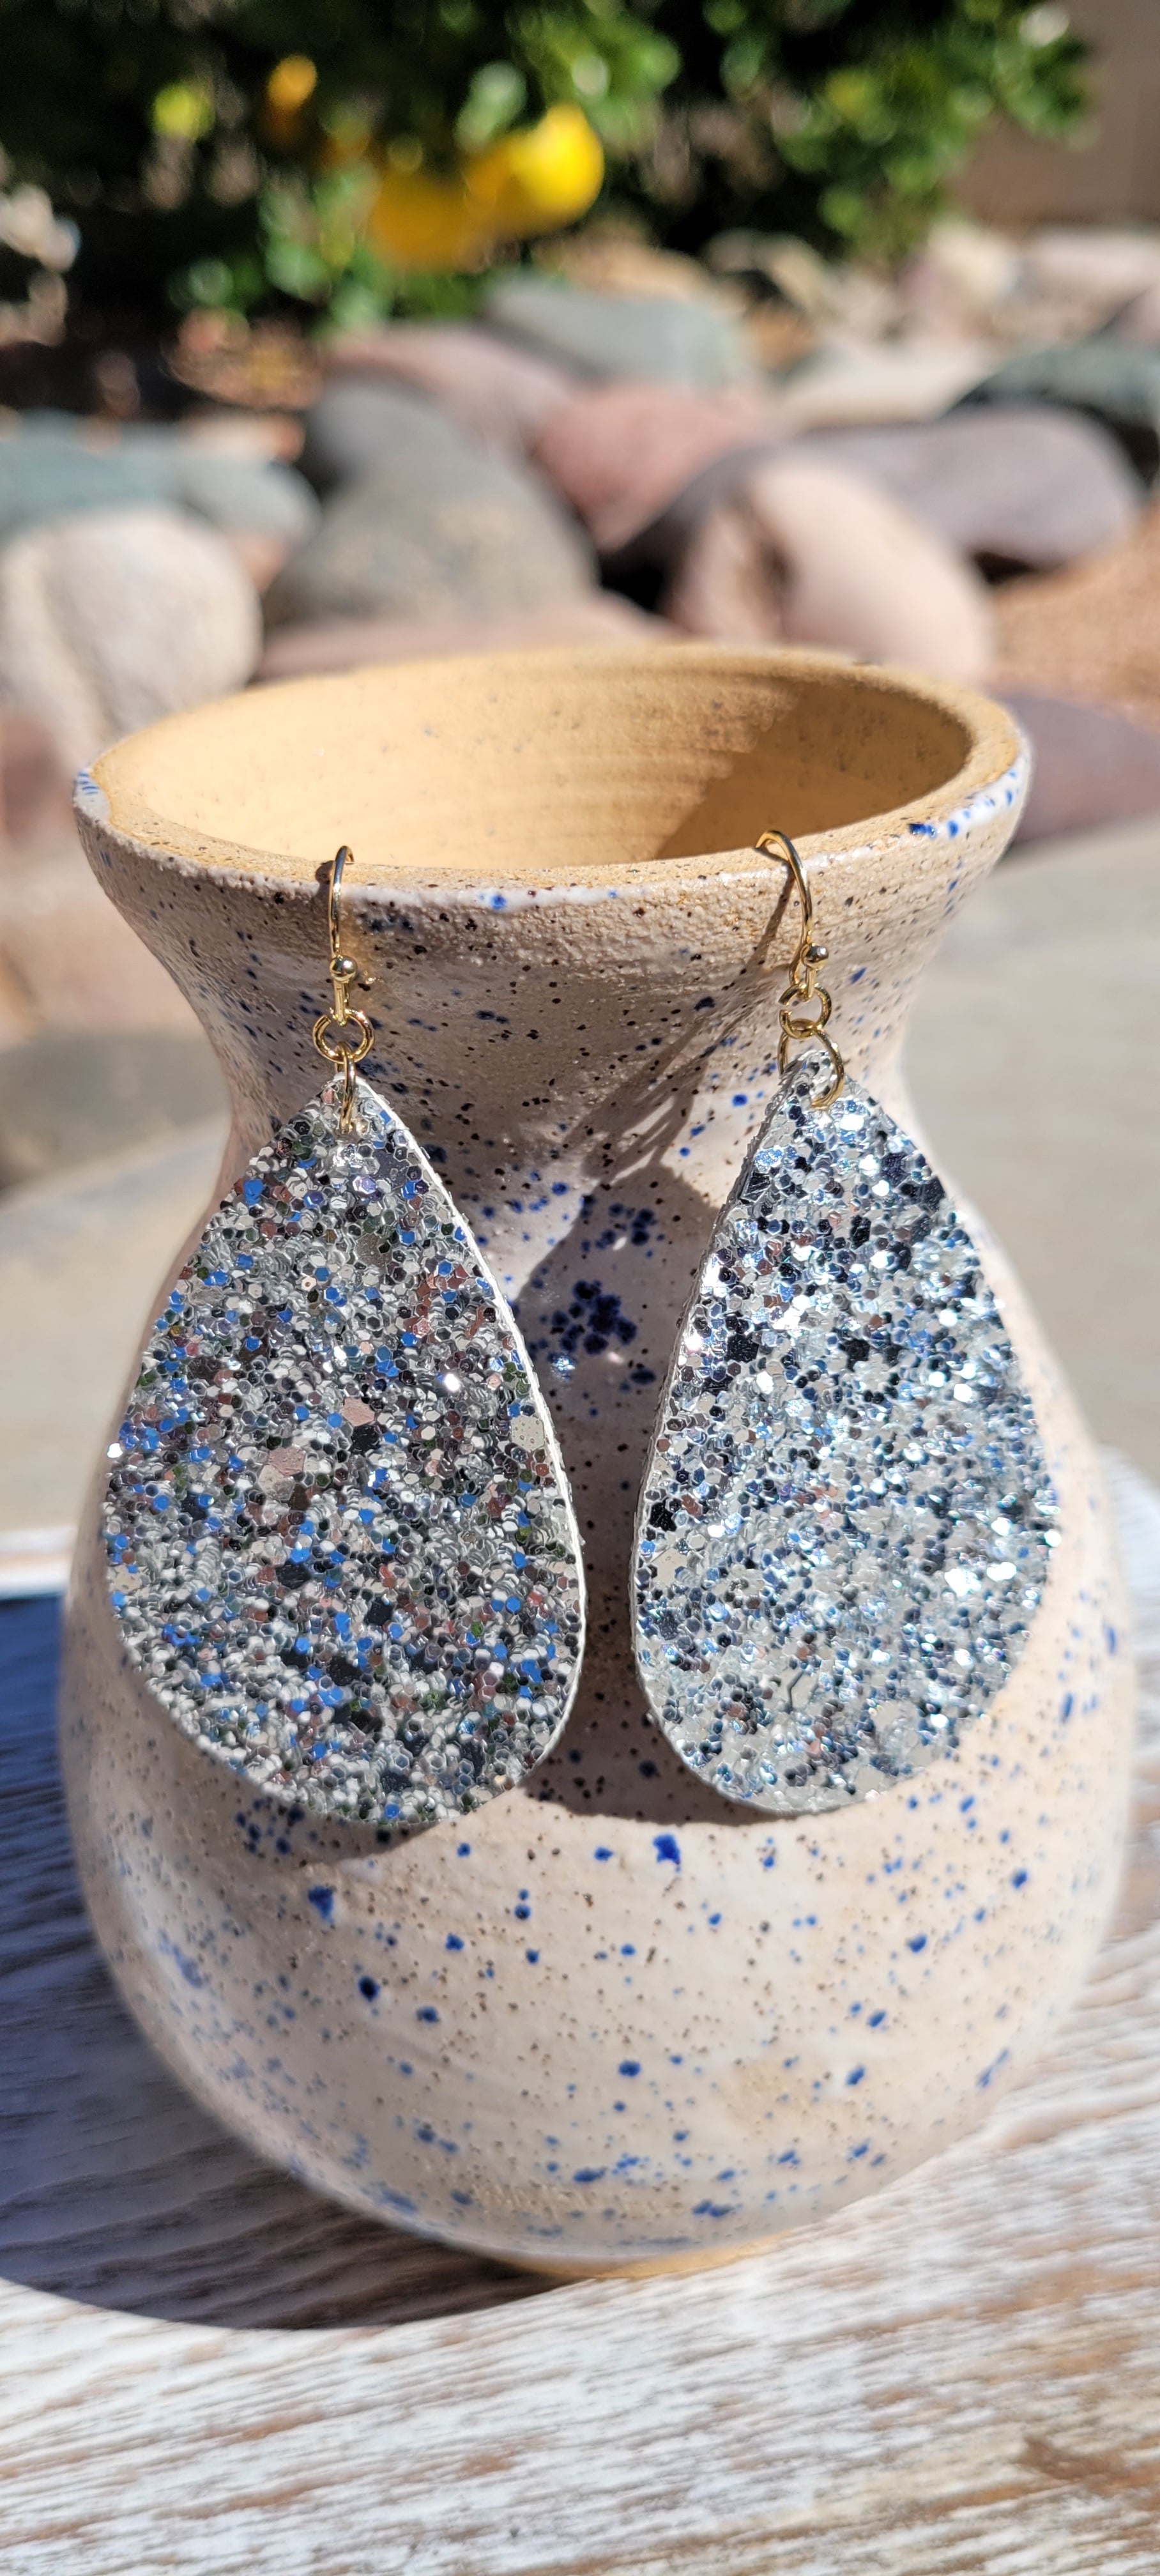 Teardrop shape Silver glitter and sequins Brushed gold fish hook dangle earrings Rubber earring back Length 3” Whether you want to be on the wild side or classy this earring set it will add a fun touch to your outfit